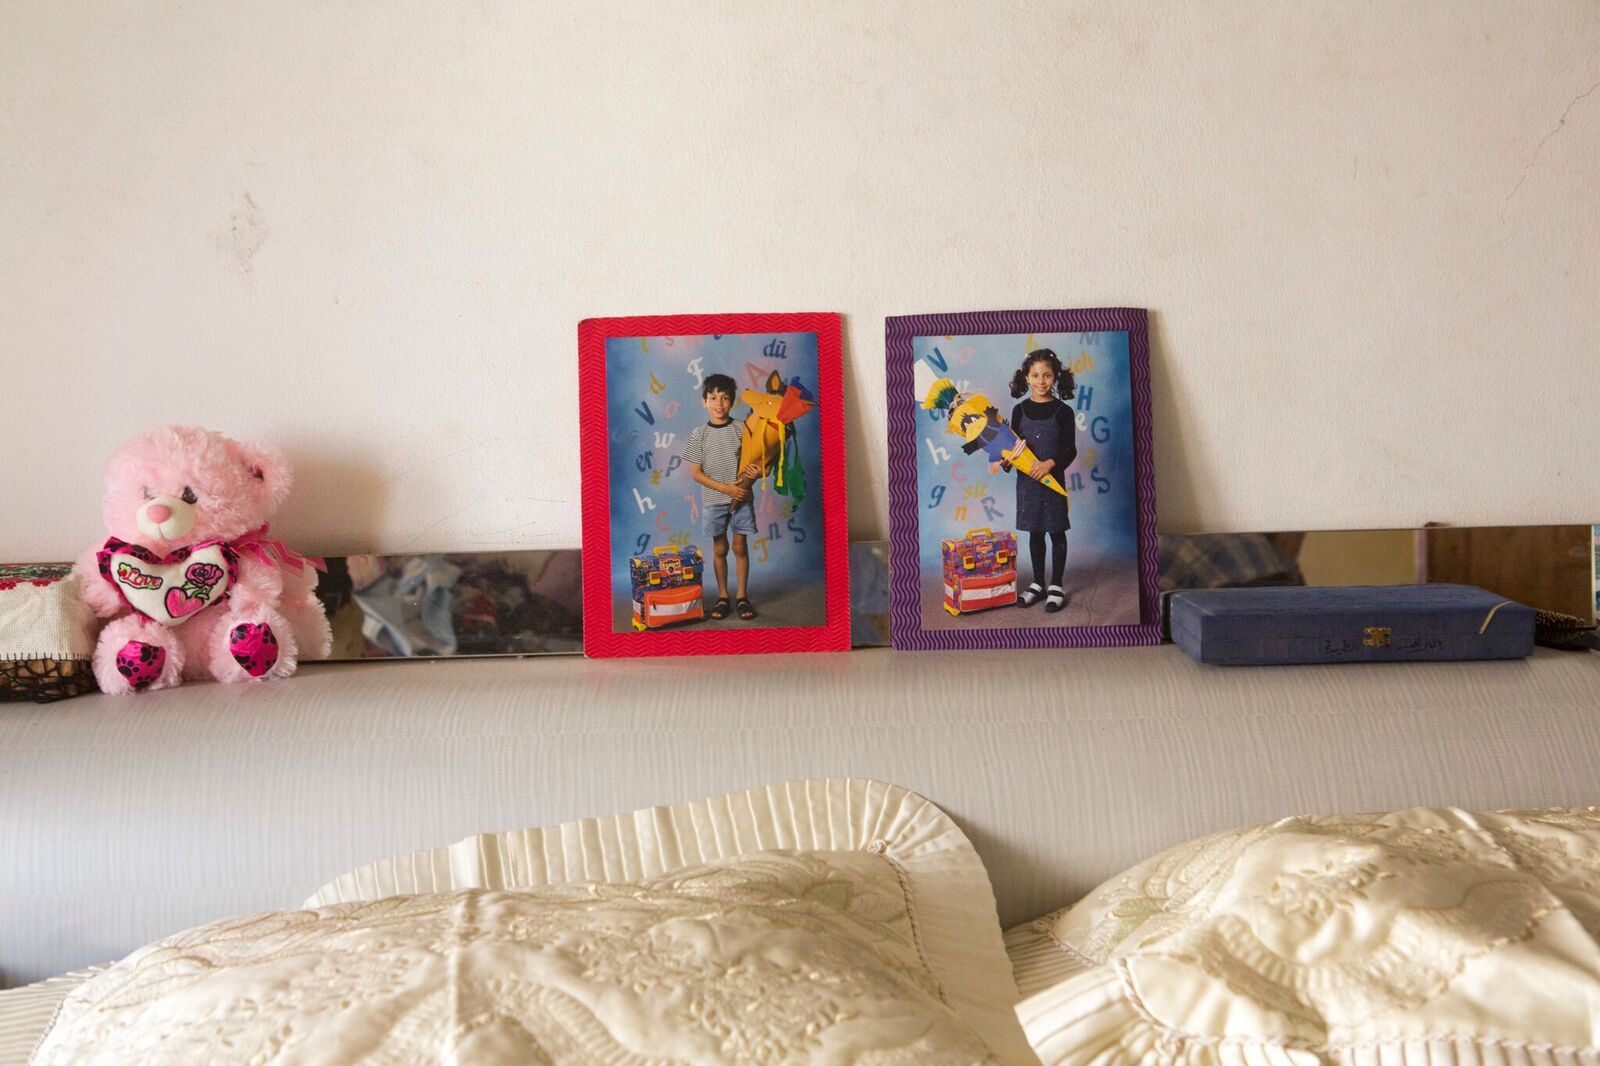 After returning to Gaza, Ibrahim married Taghrid. They had five children. Still, he missed Ramsis and Layla. Their childhood photos took the honorary spot above the bedhead in Kilani's house.
